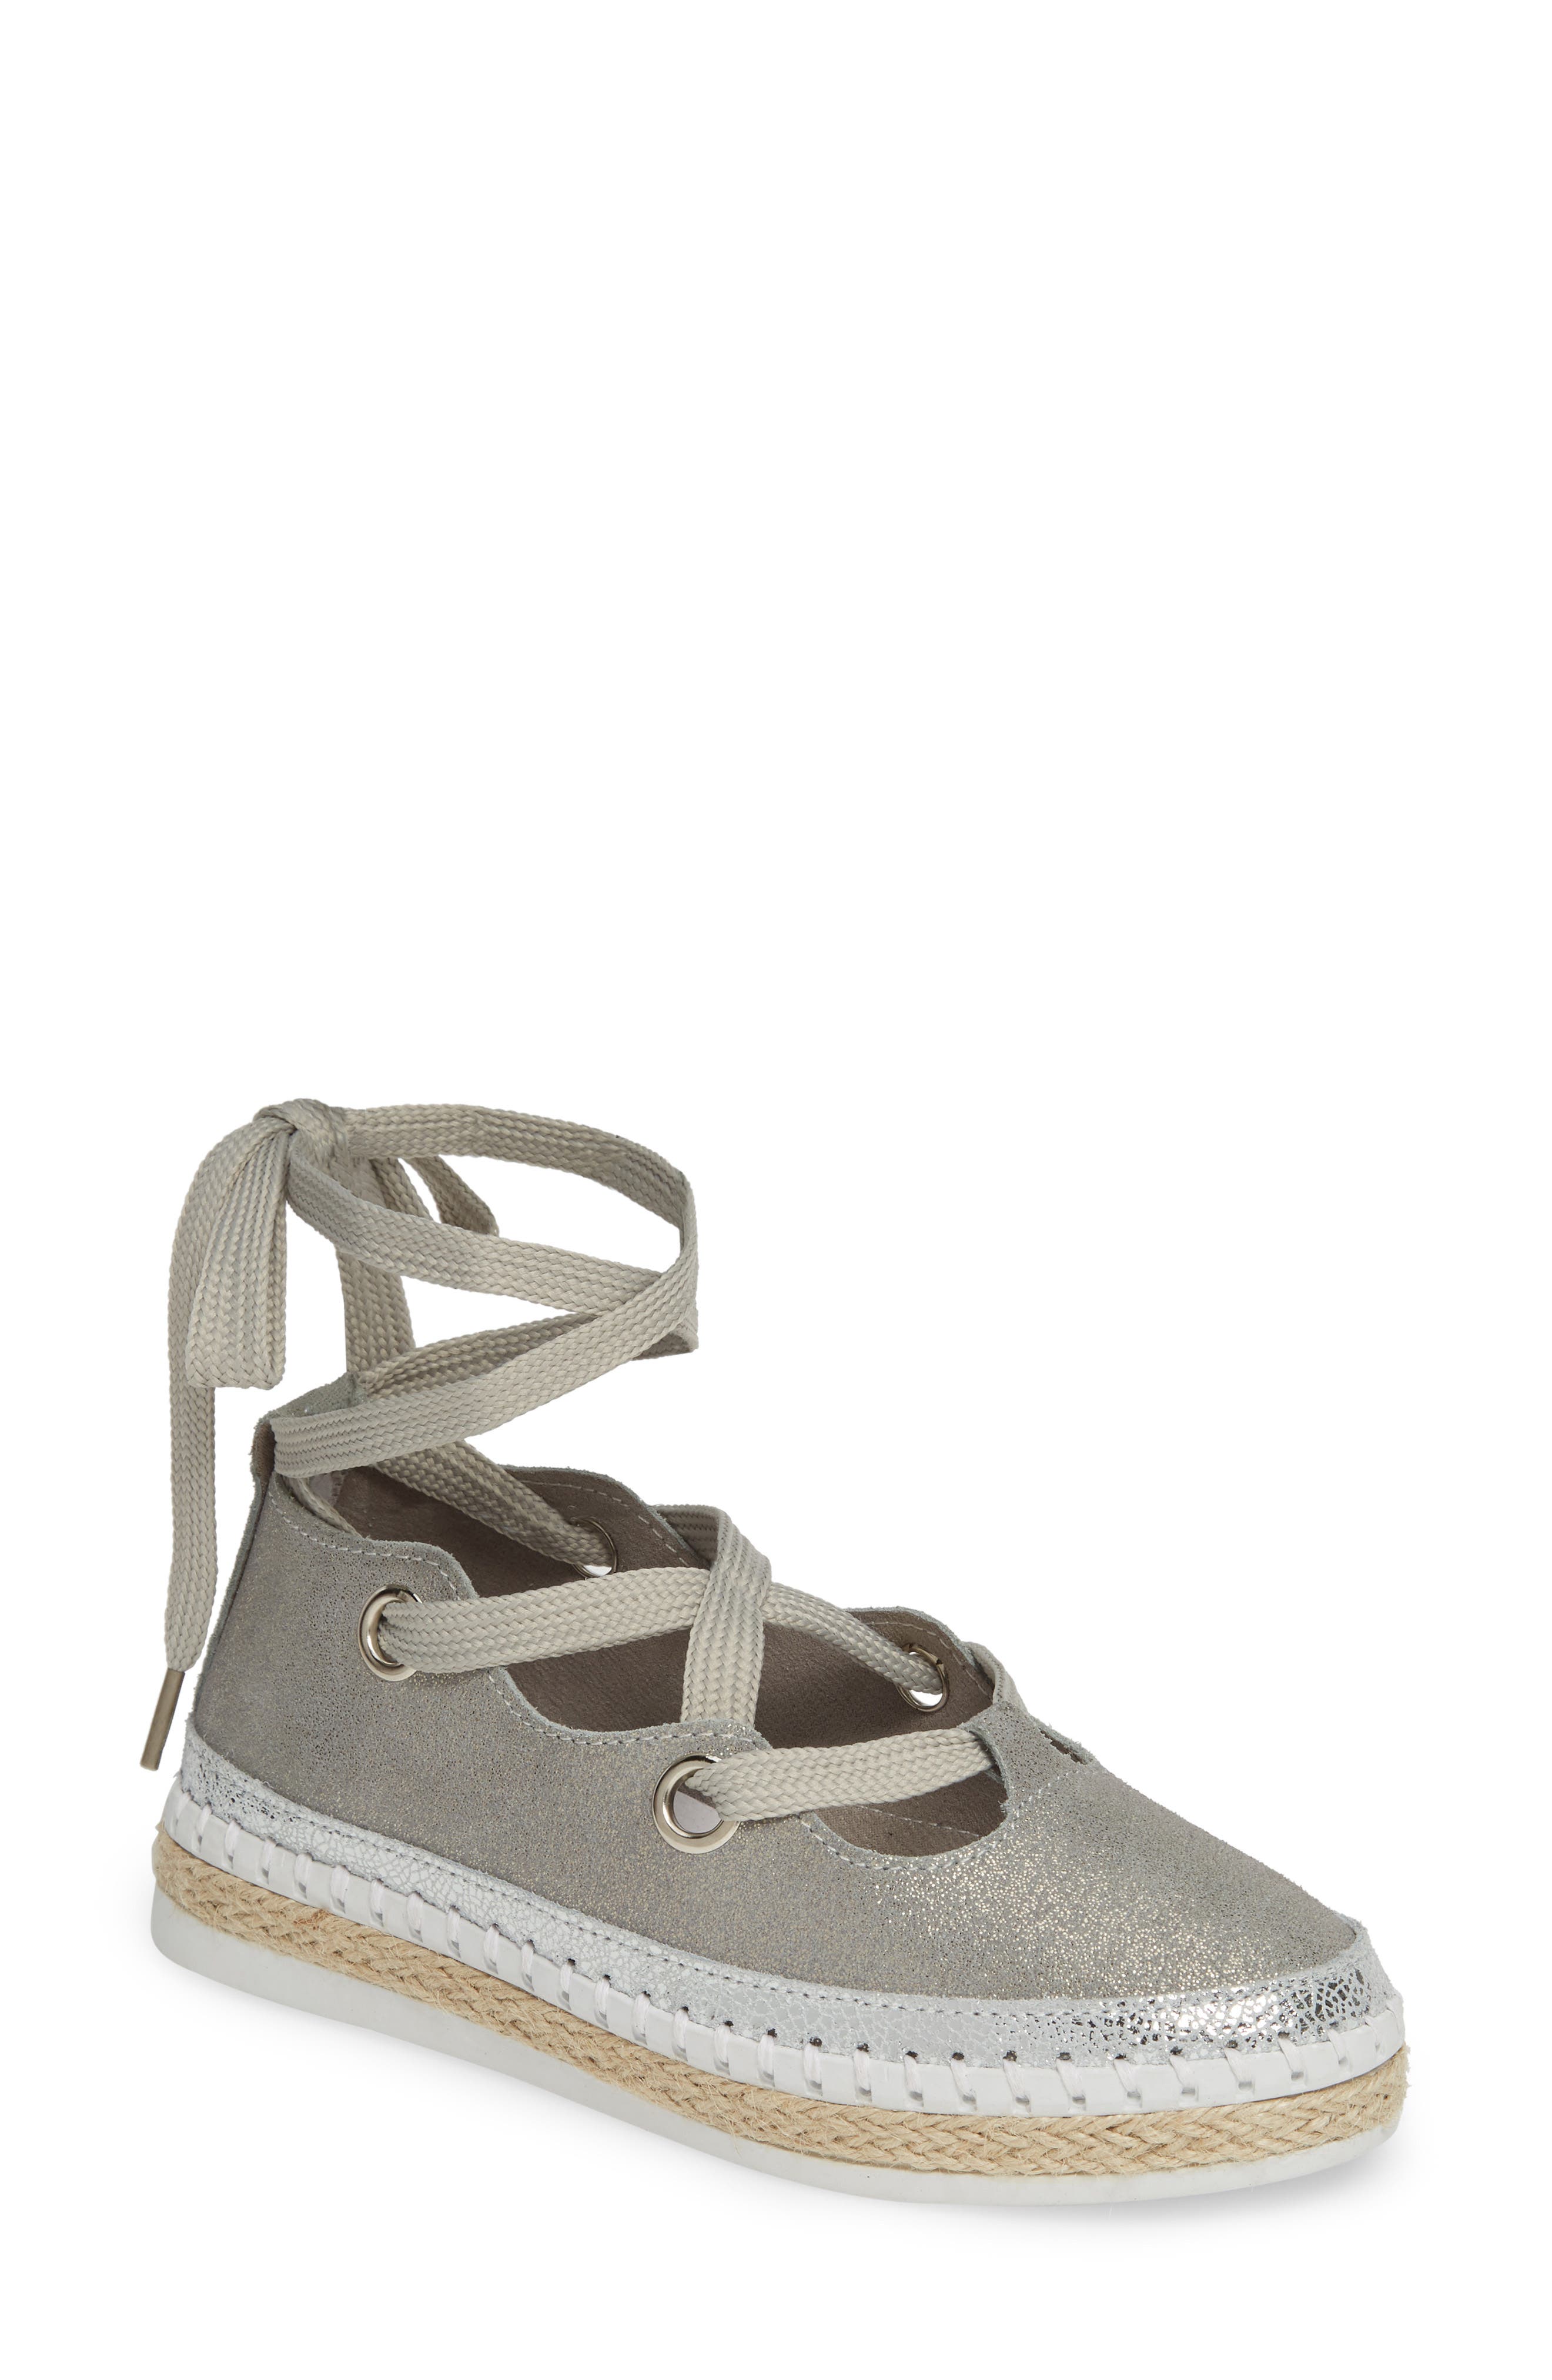 bernie mev. TW189 Lace-Up Flat in Nude Shimmer Leather